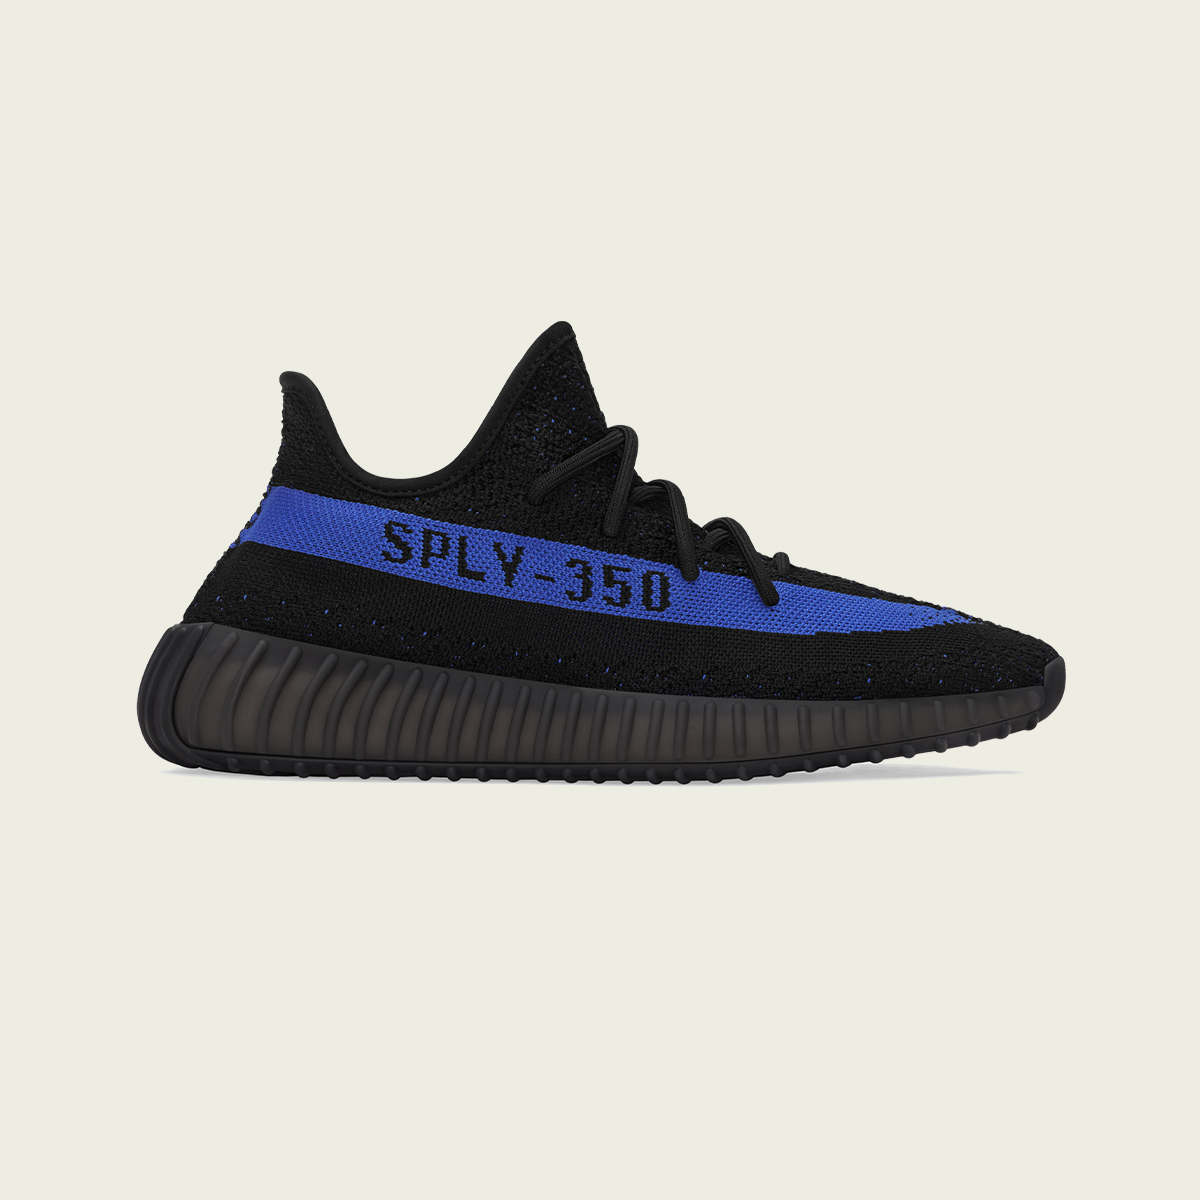 Foot Locker on Twitter: "#YEEZY 350 V2 'DAZZLING LAUNCHES FEBRUARY 26 IN MENS AND KIDS SIZES. https://t.co/yMut9o9yj4" / Twitter